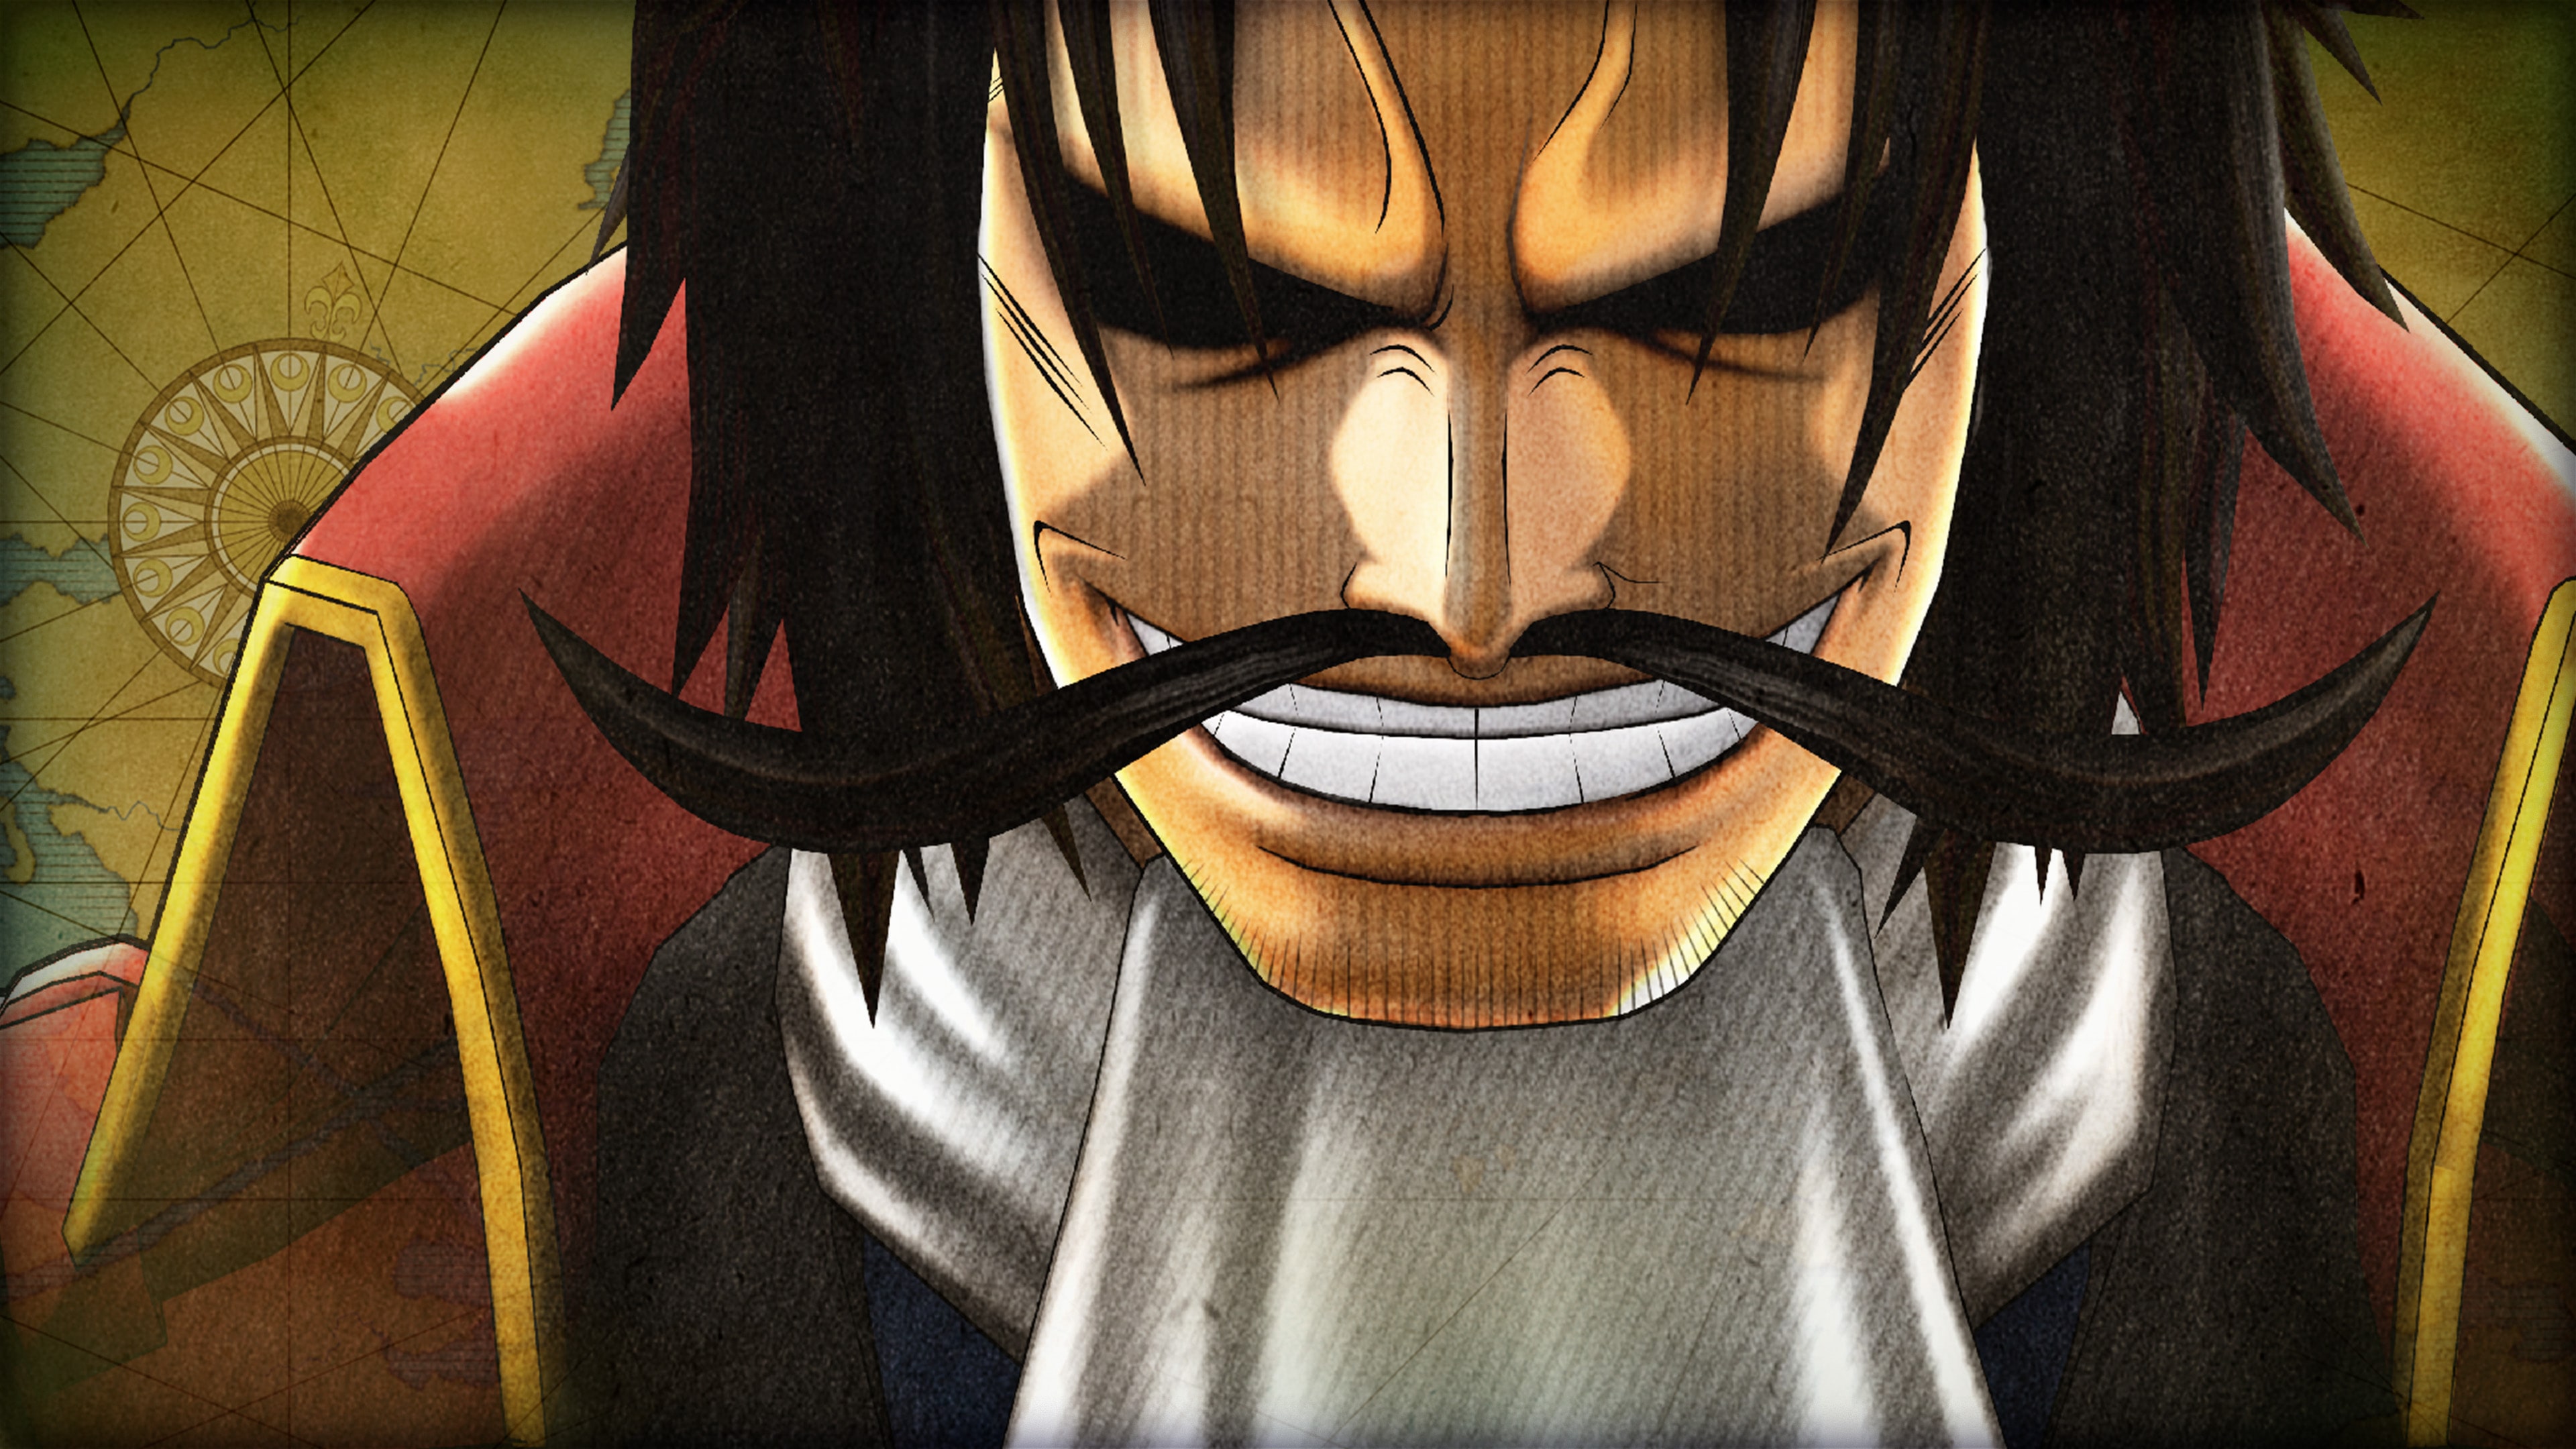 ONE PIECE: PIRATE WARRIORS 4 Path to the King of the Pirates & Soul Map 3